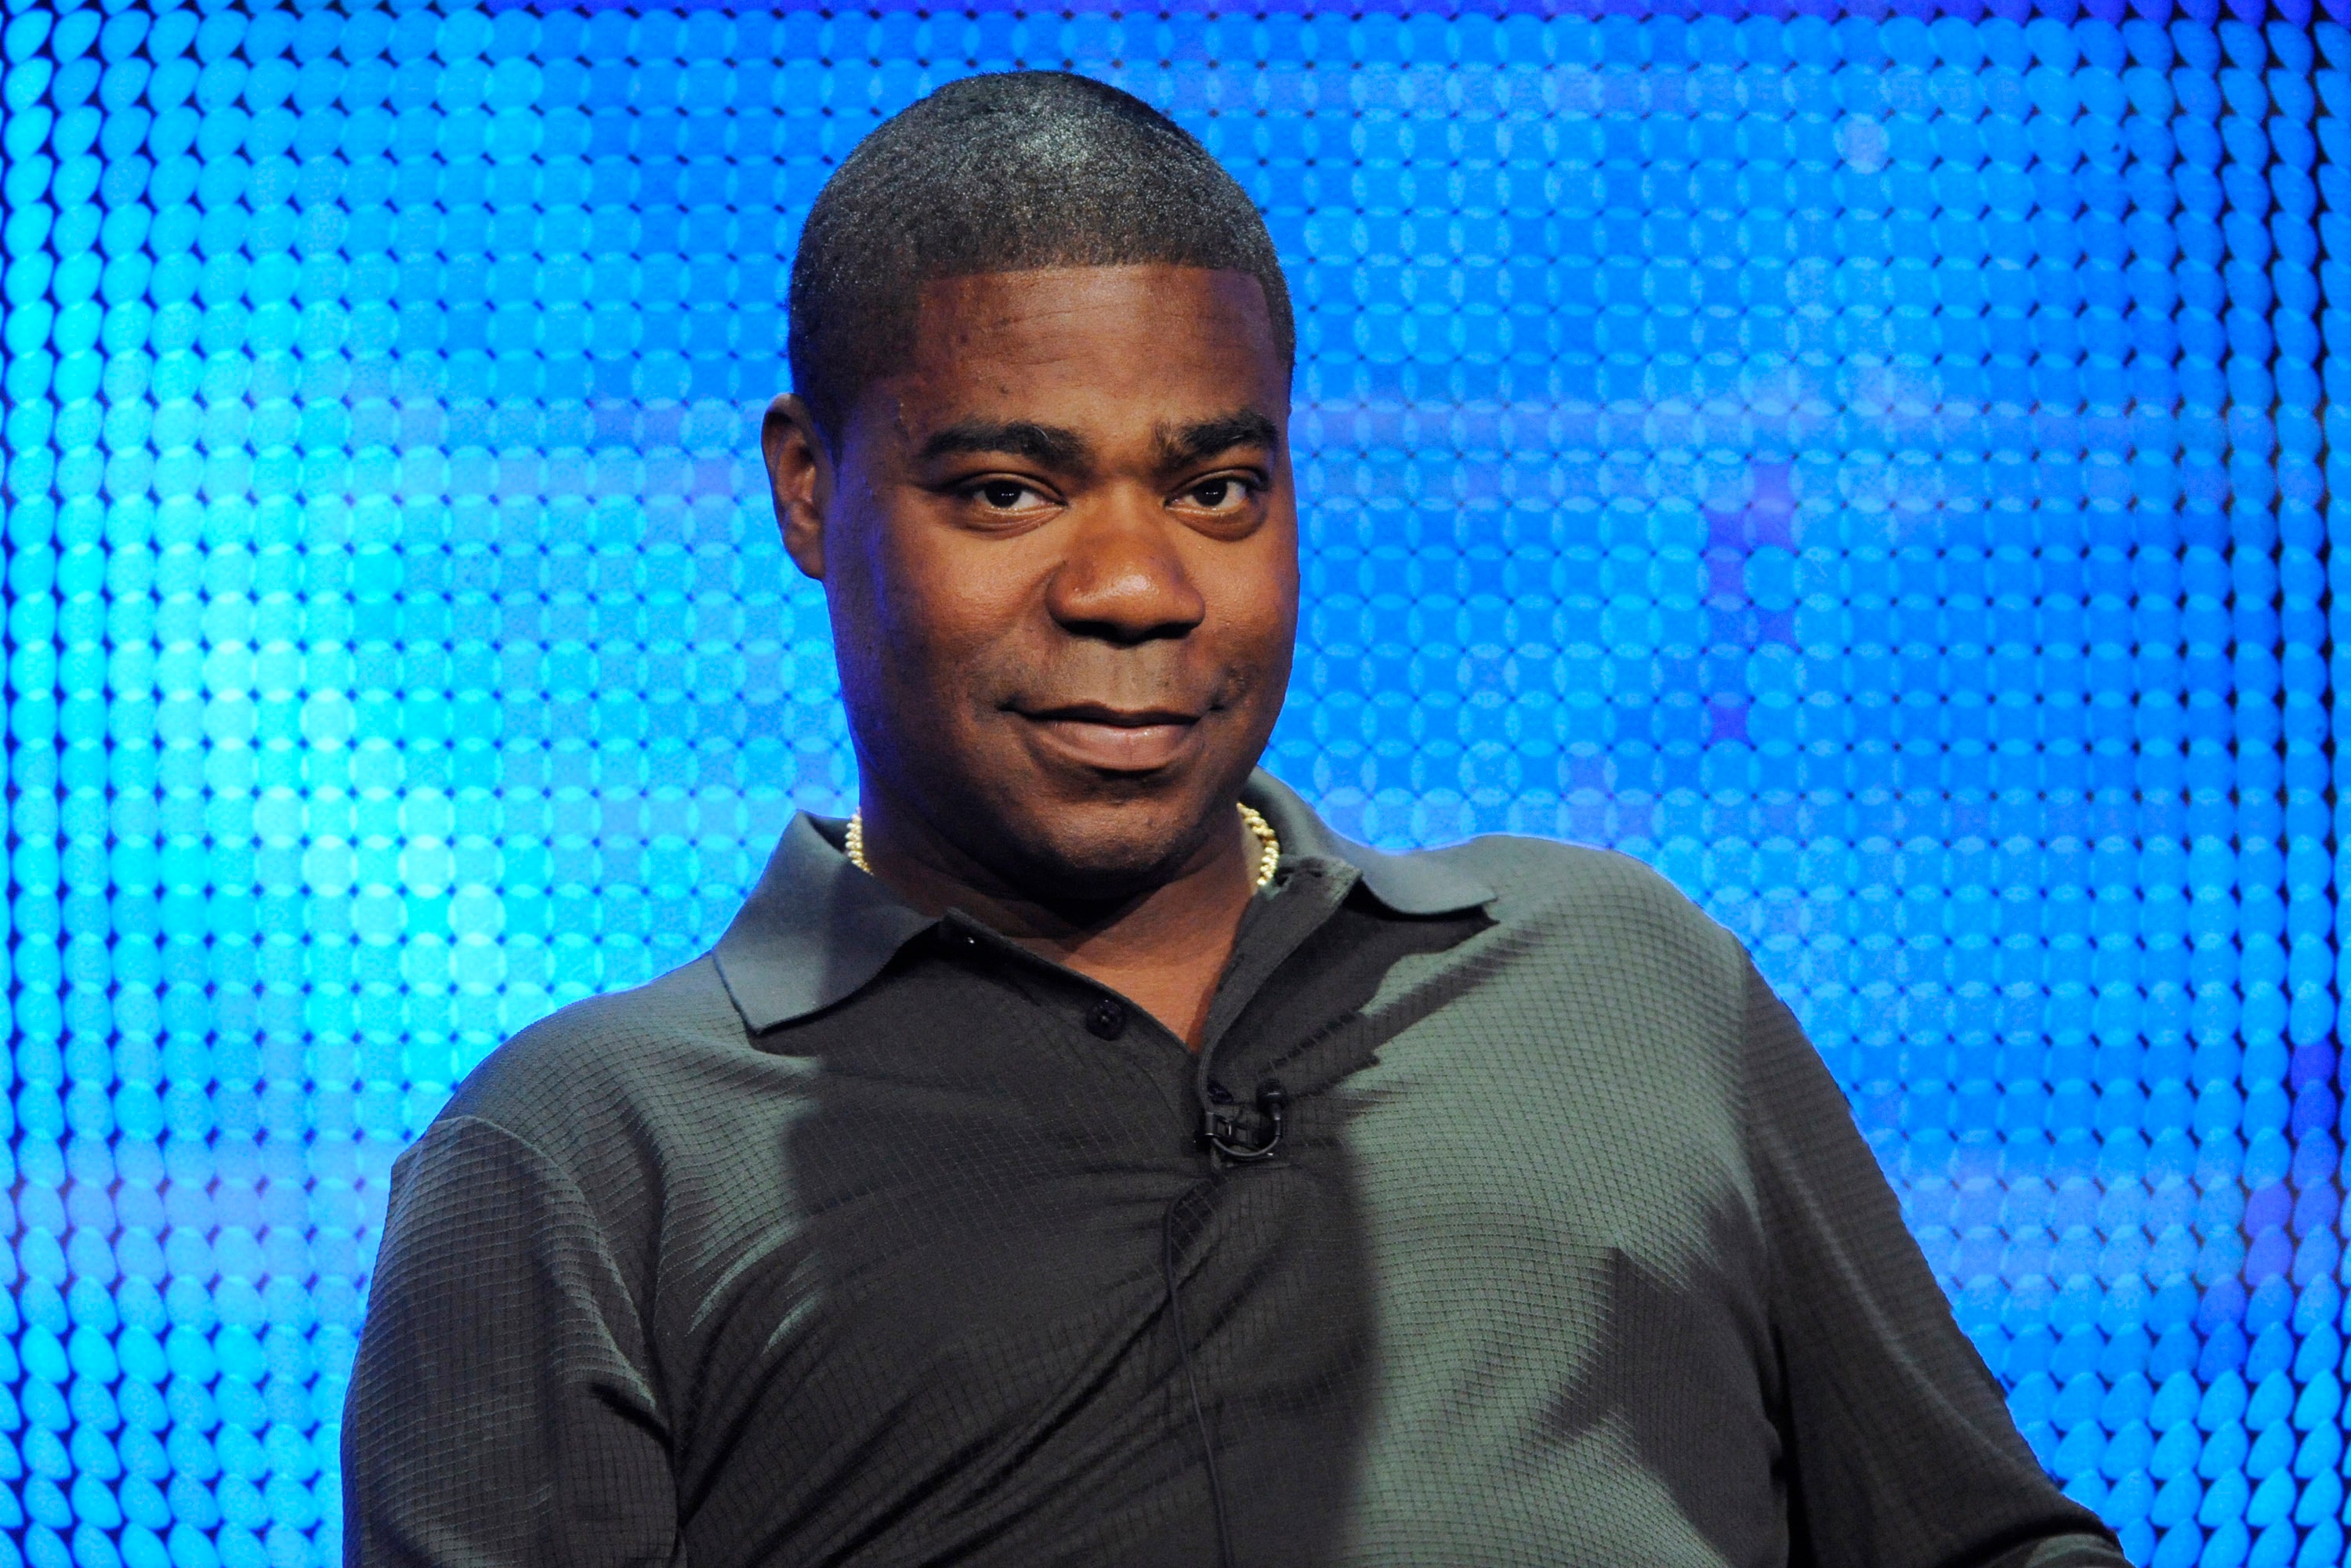 Writer and actor Tracy Morgan is suing Wal-Mart for negligence